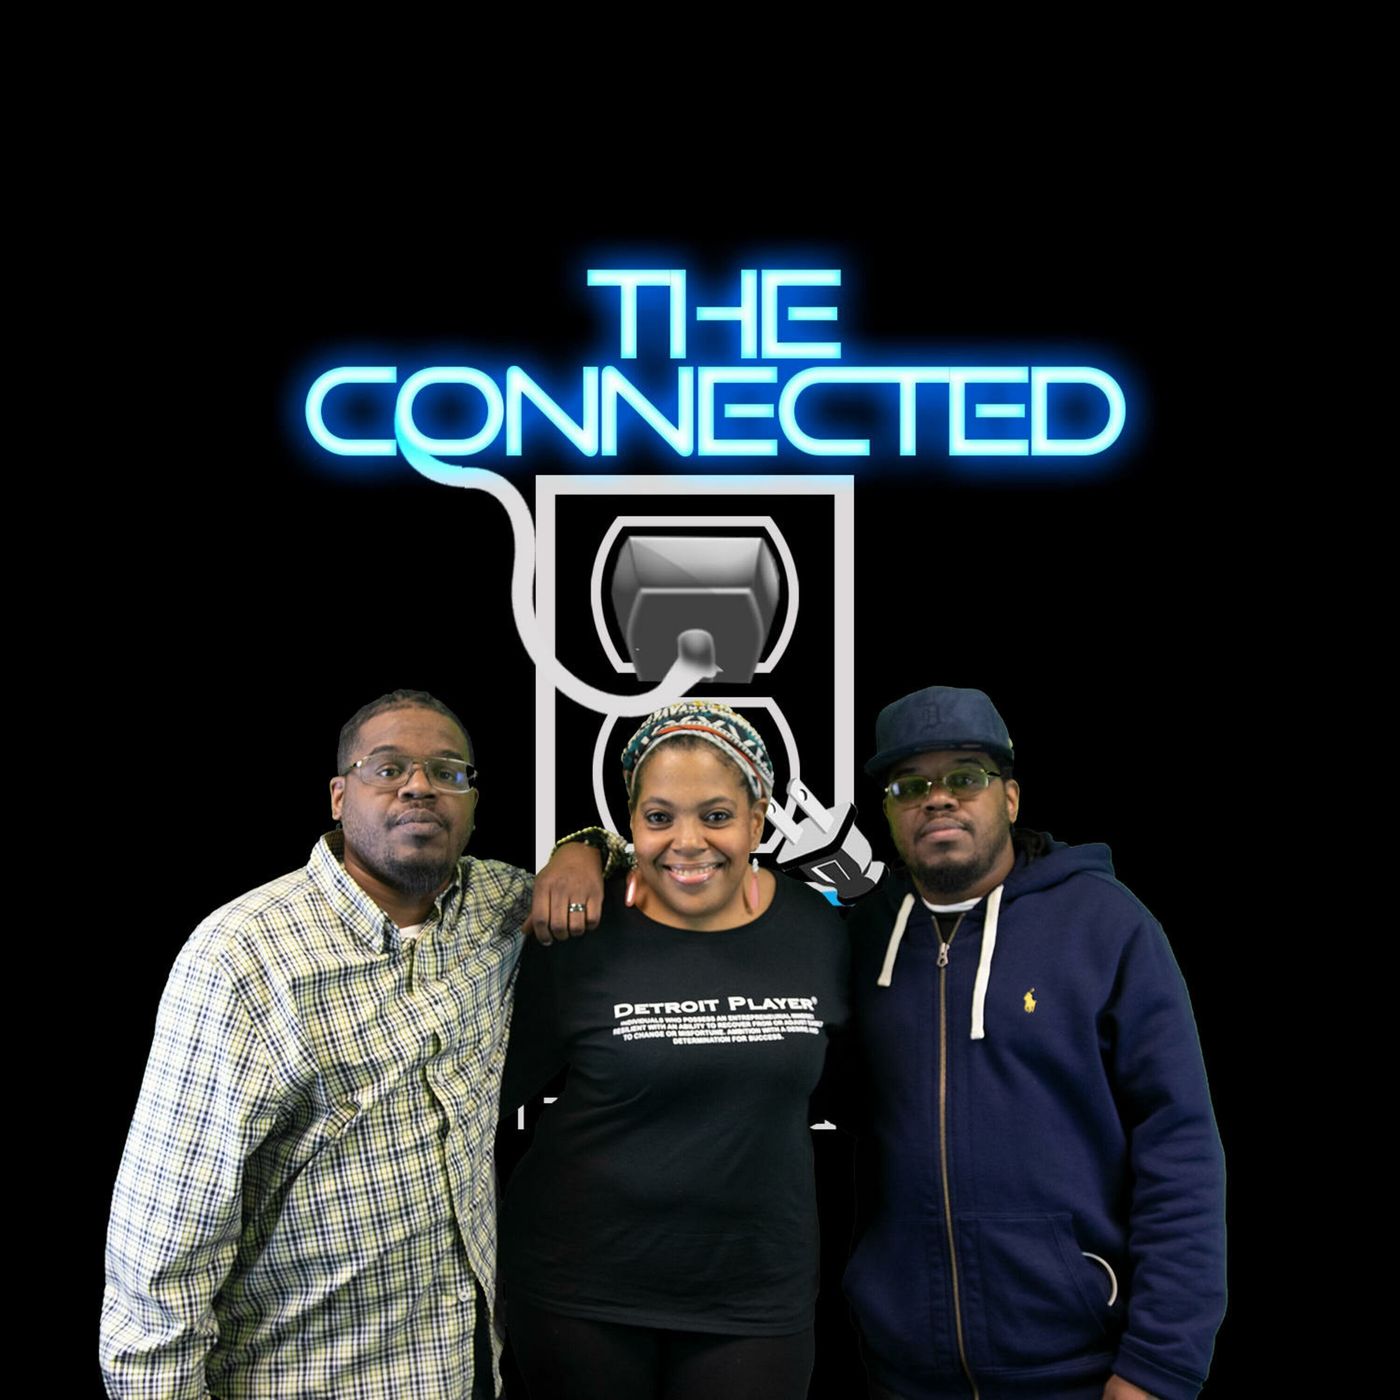 The Connected Experience-Diva’s Corner with Biba the Diva